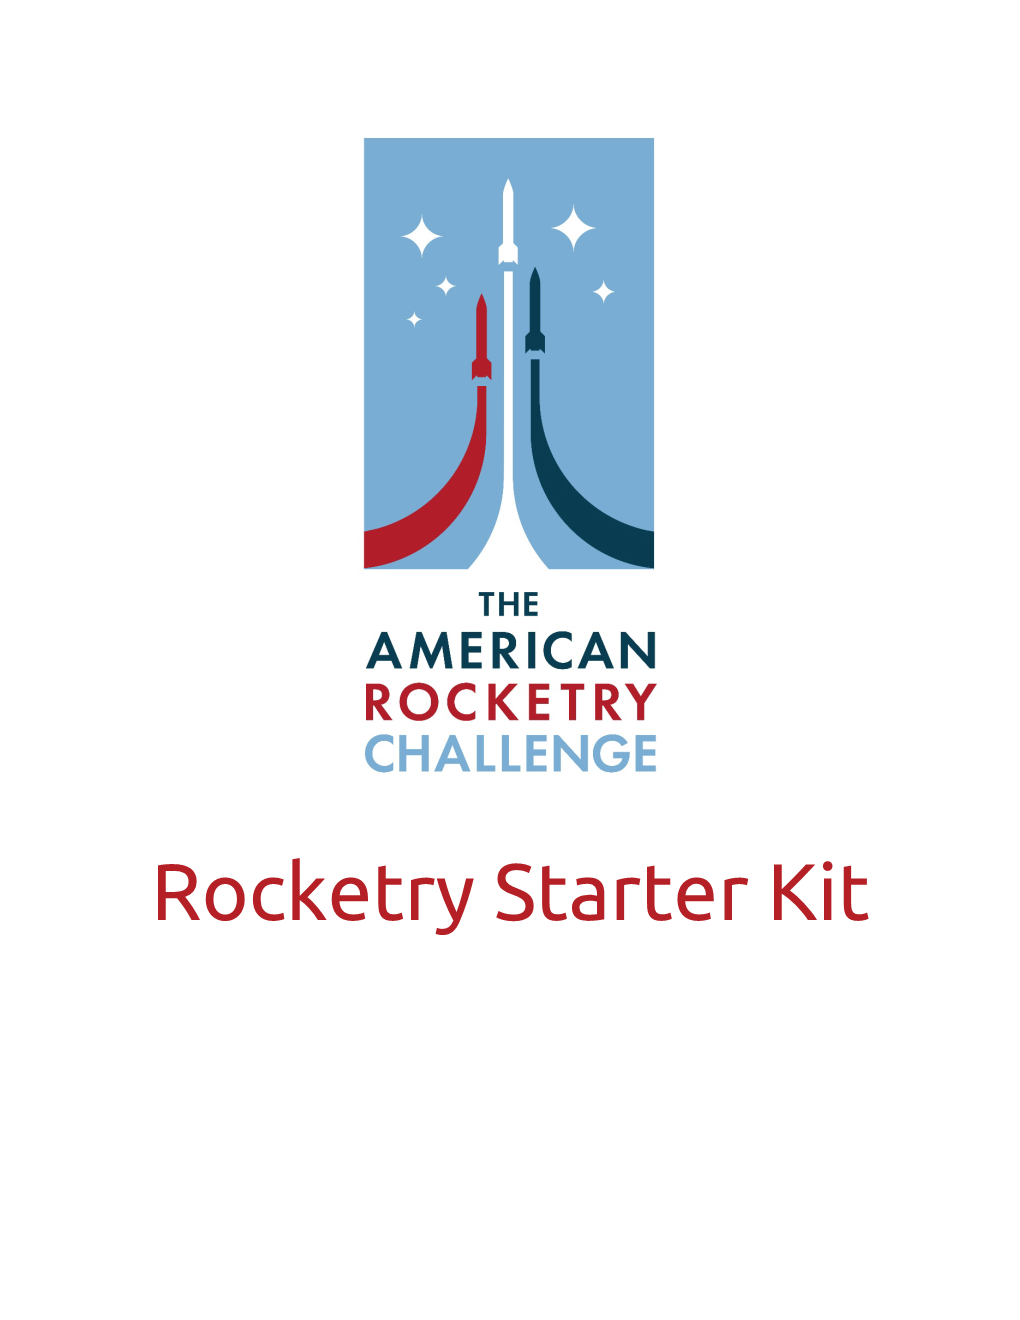 Rocketry Starter Kit the AMERICAN ROCKETRY CHALLENGE the WORLD’S LARGEST STUDENT ROCKET CONTEST